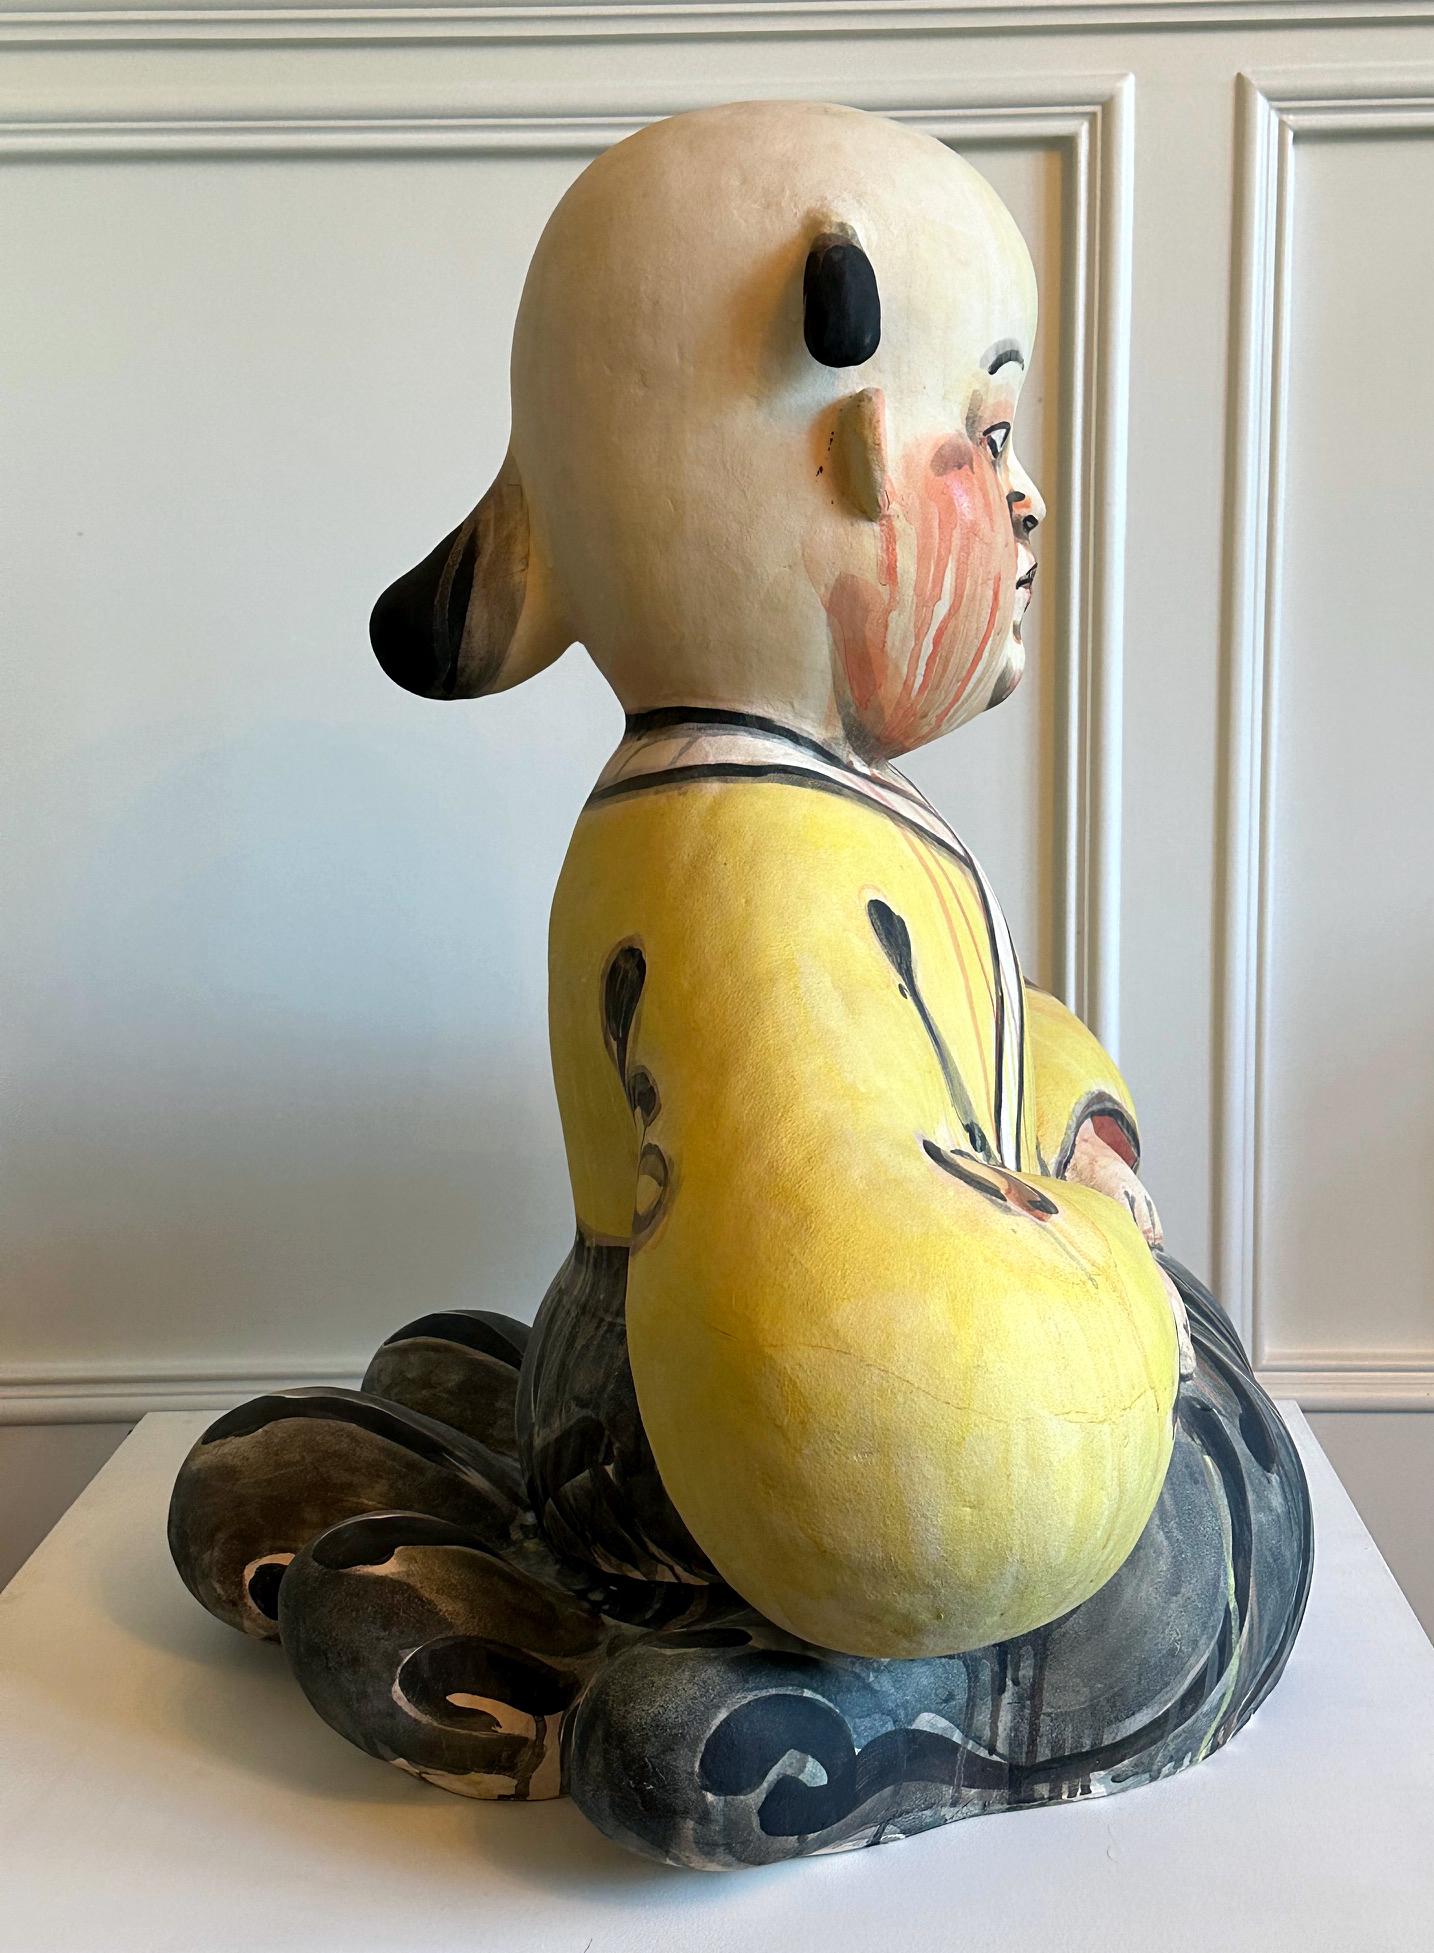 Hand-Painted Important Ceramic Sculpture Karako by Akio Takamori Exhibited and Published For Sale